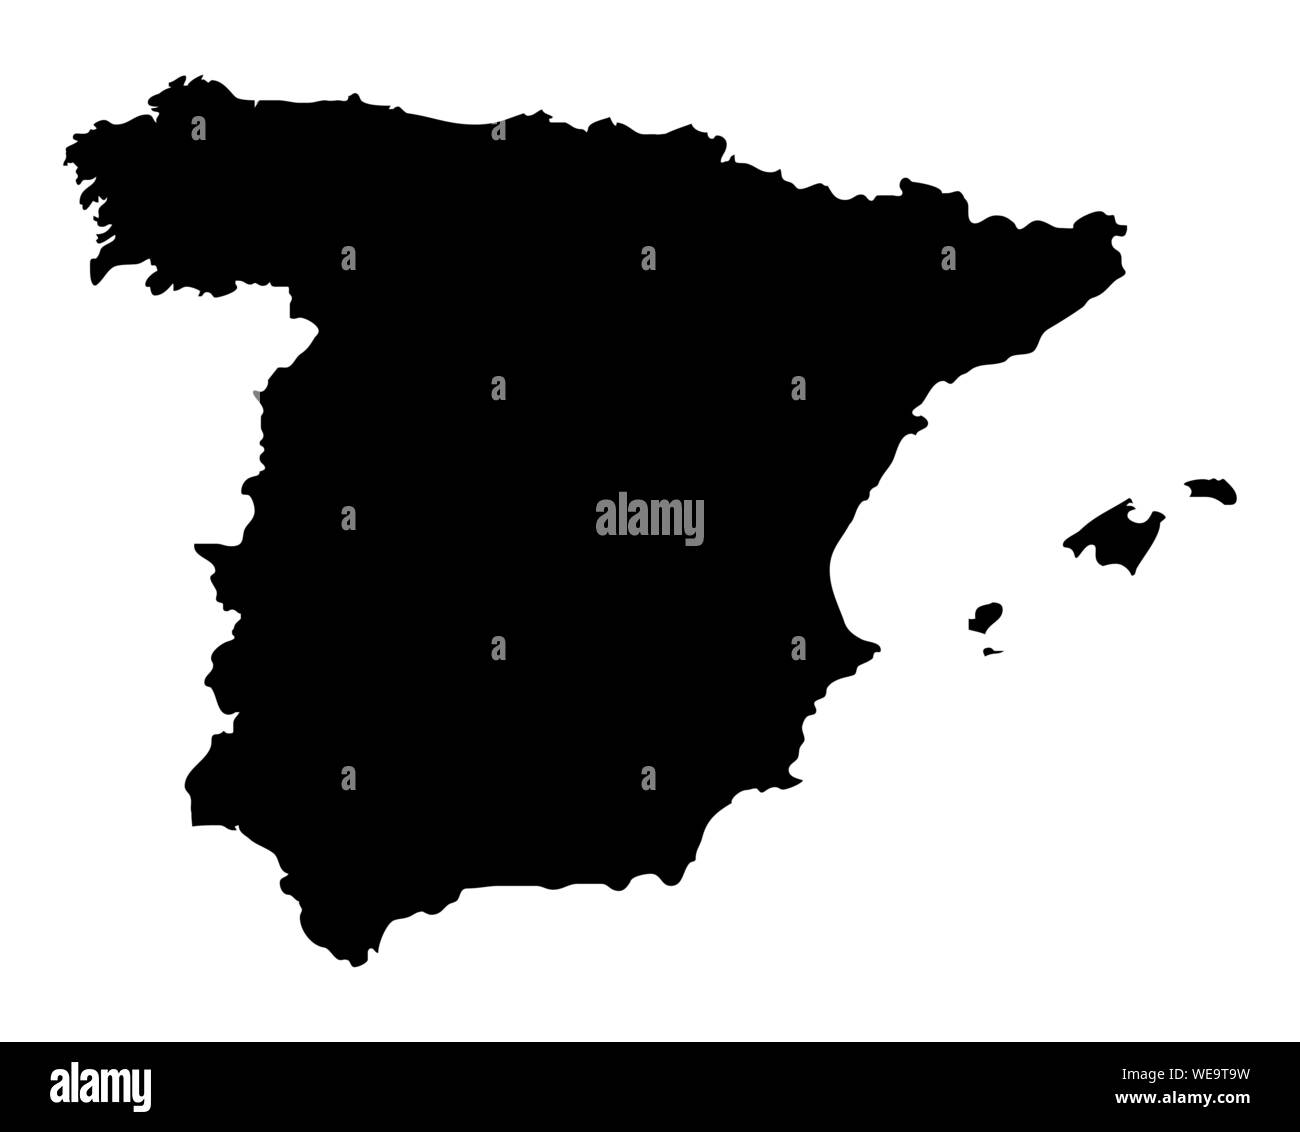 Spain silhouette map Stock Vector